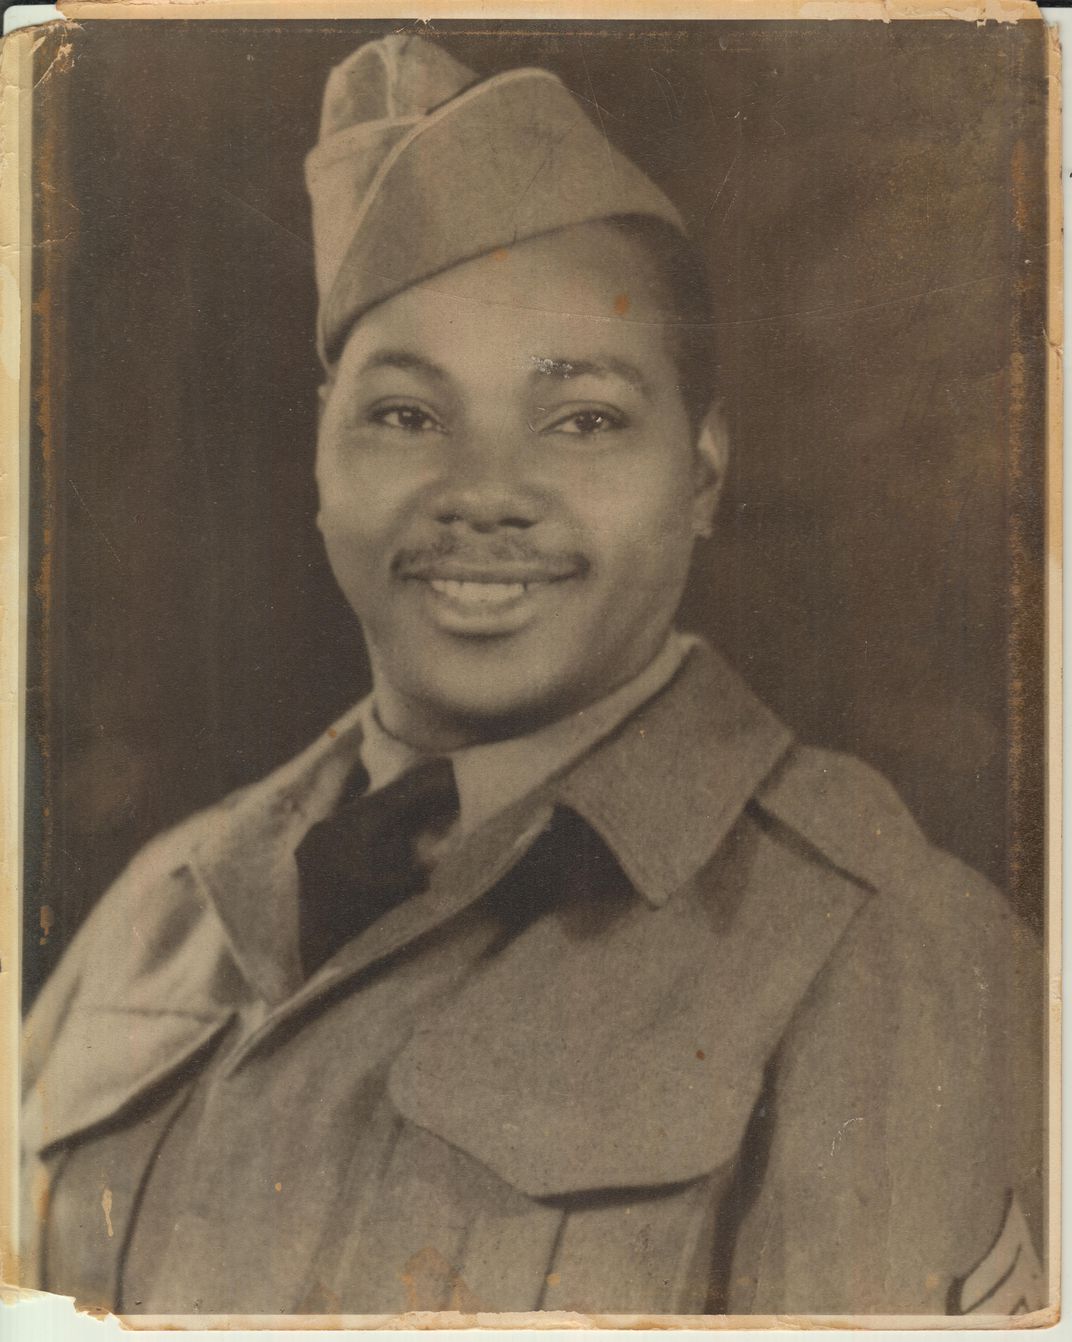 Brooks in 1941. (Source: The National WWII Museum)